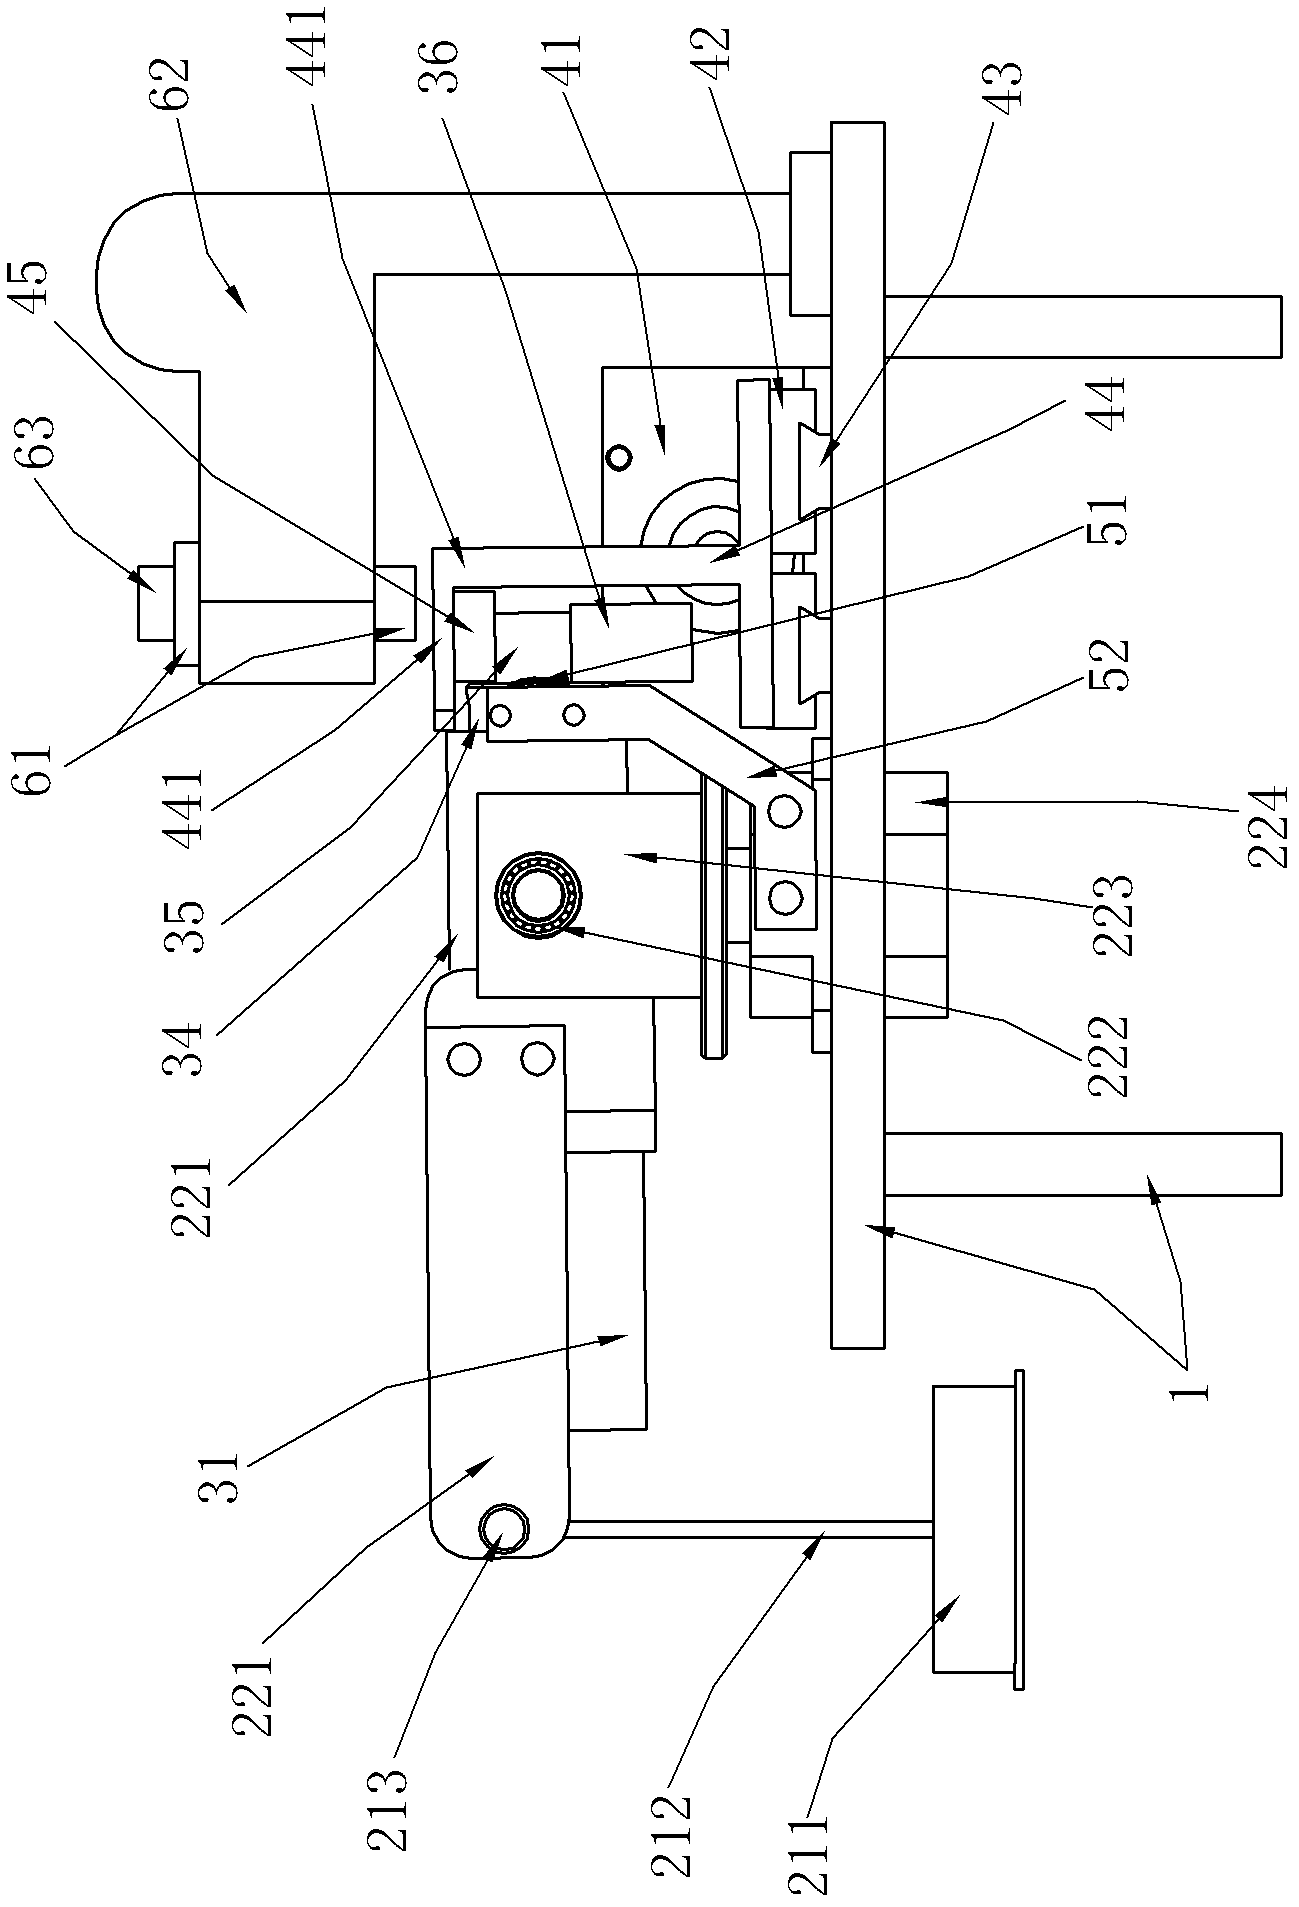 Sliding-rolling combined type soft friction test apparatus